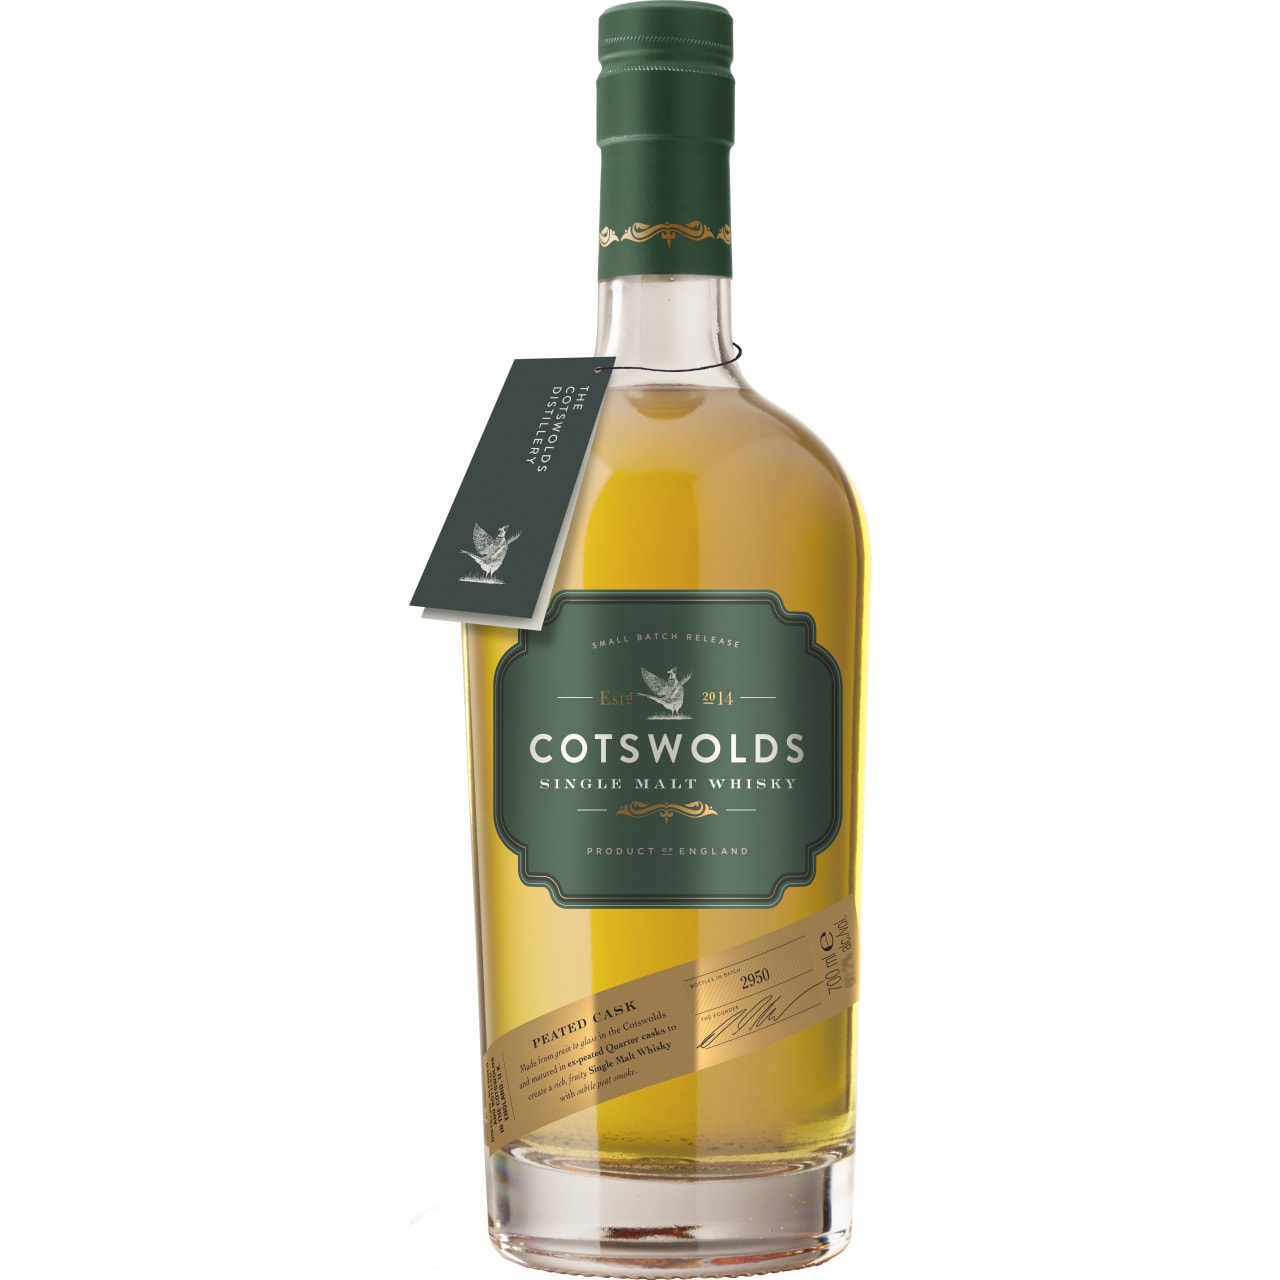 Delightful and moreish whisky with subtle hints of peat smoke on the palate which complement the vanilla notes from the oak and the fruitiness of our spirit.